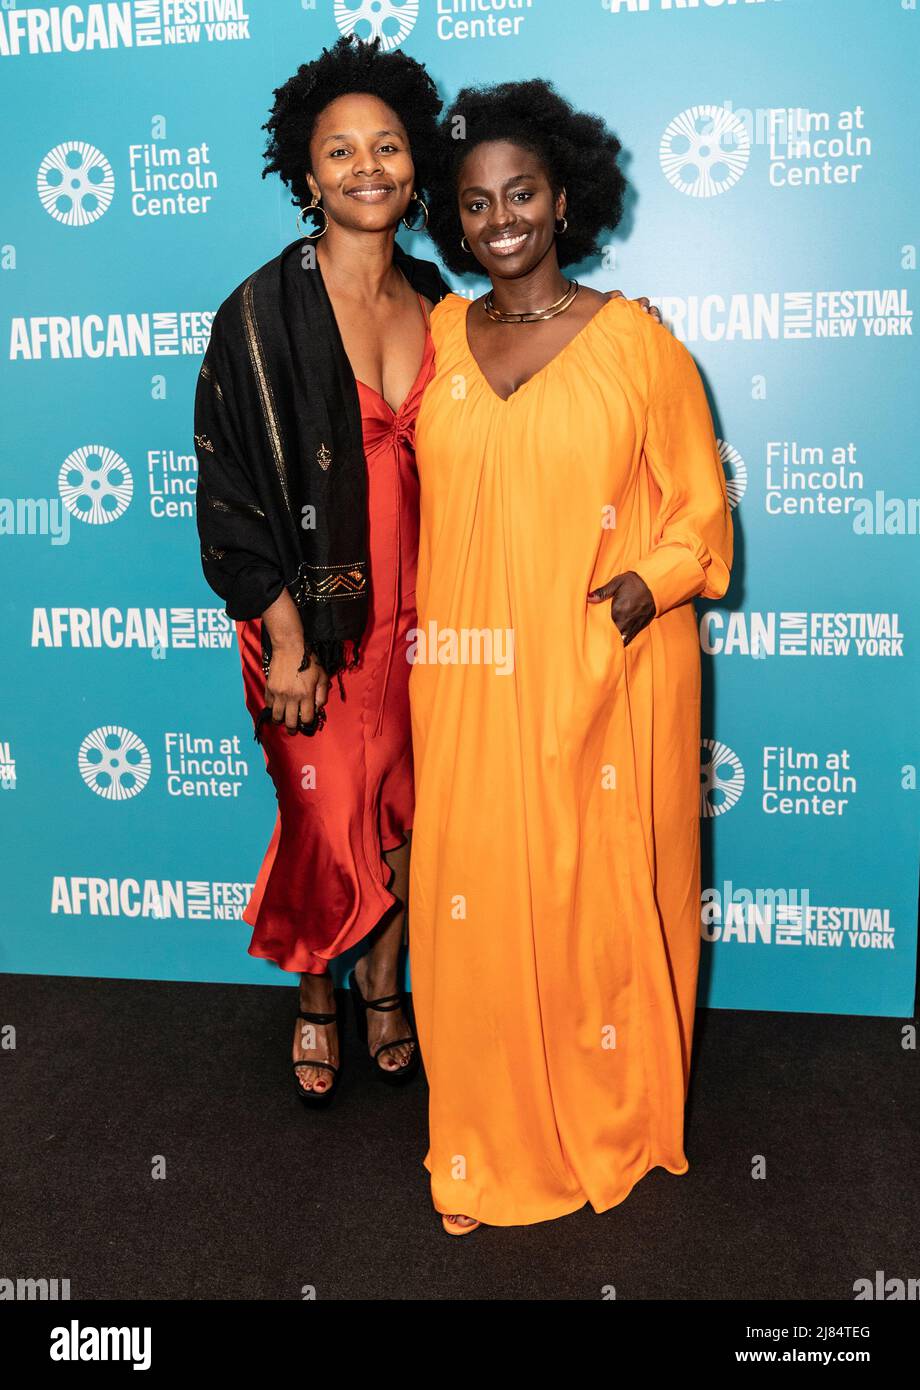 New York, USA. 12th May, 2022. Gessica Geneus and Aissa Maiga attend New York African Film Festival opening night at Walter Reade Theater in New York on May 12, 2022. (Photo by Lev Radin/Sipa USA) Credit: Sipa USA/Alamy Live News Stock Photo